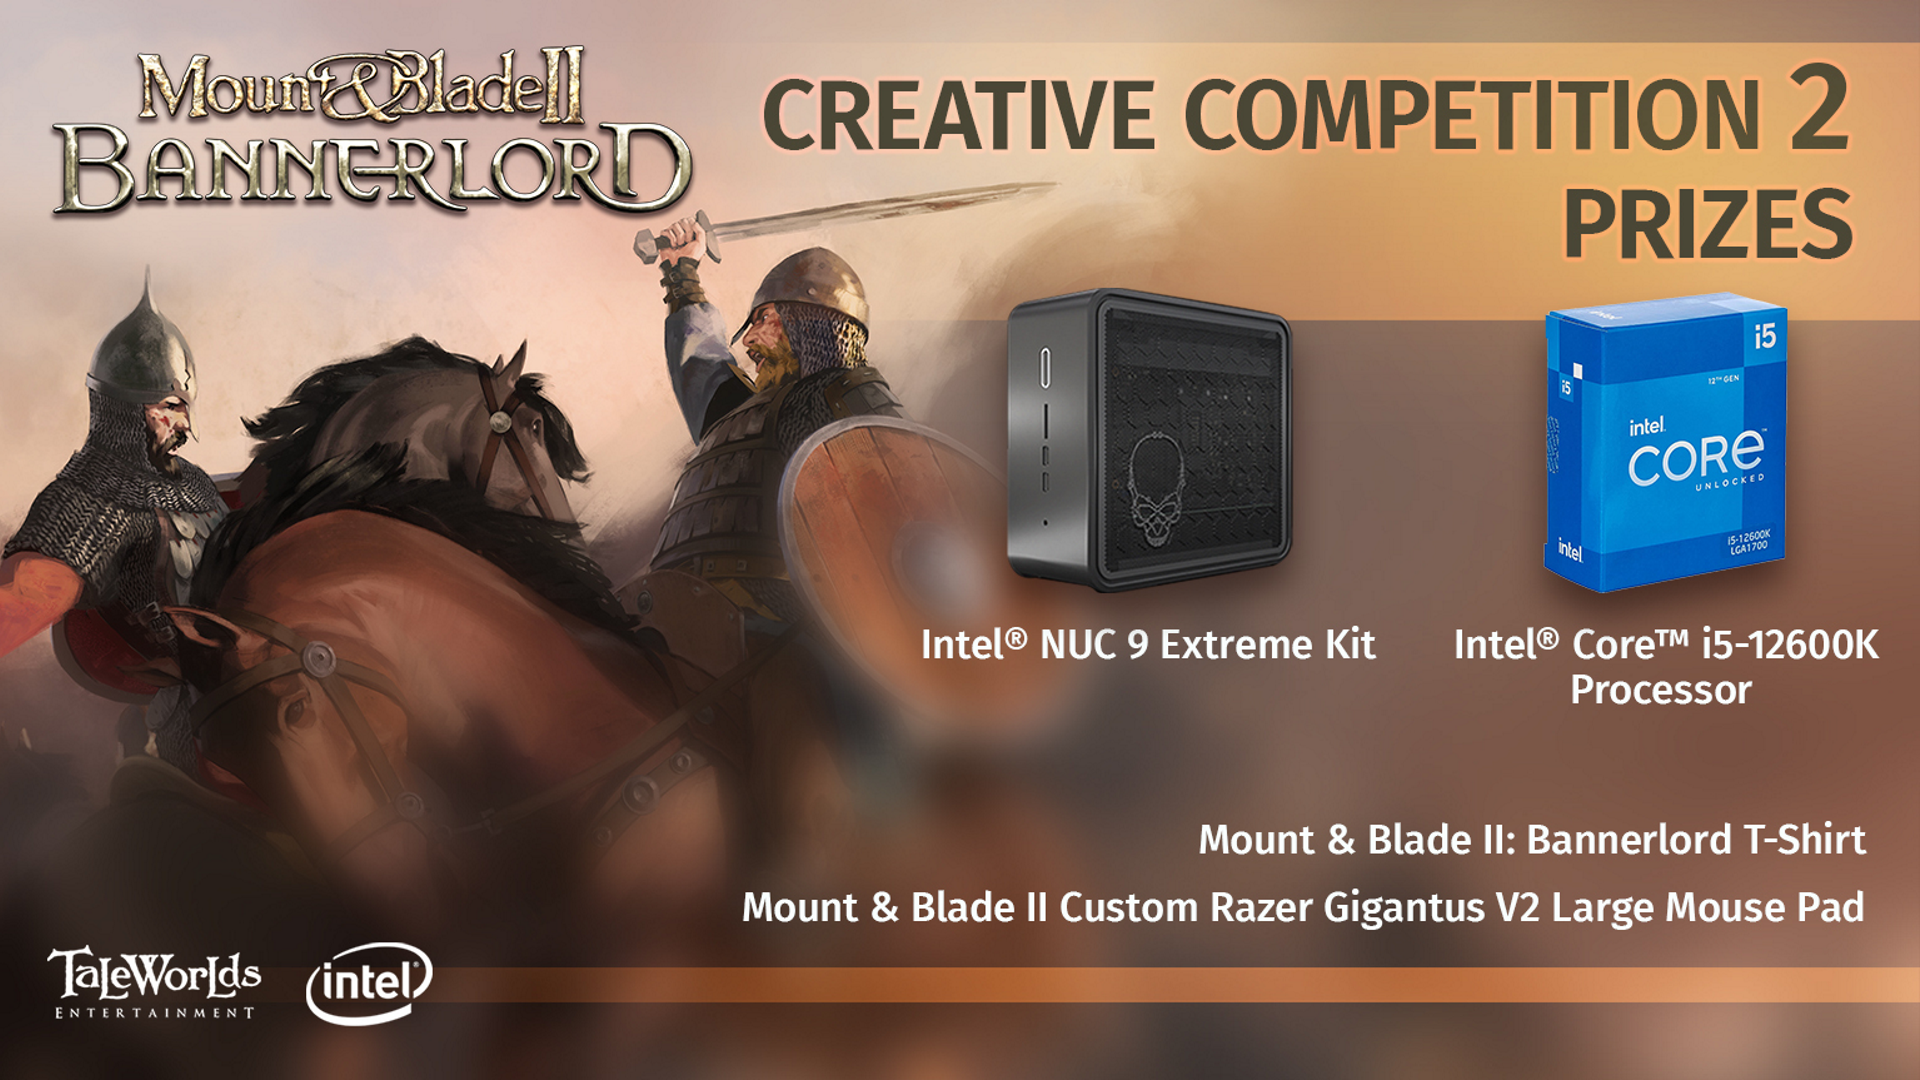 Bannerlord Creative Competition_prizes.png